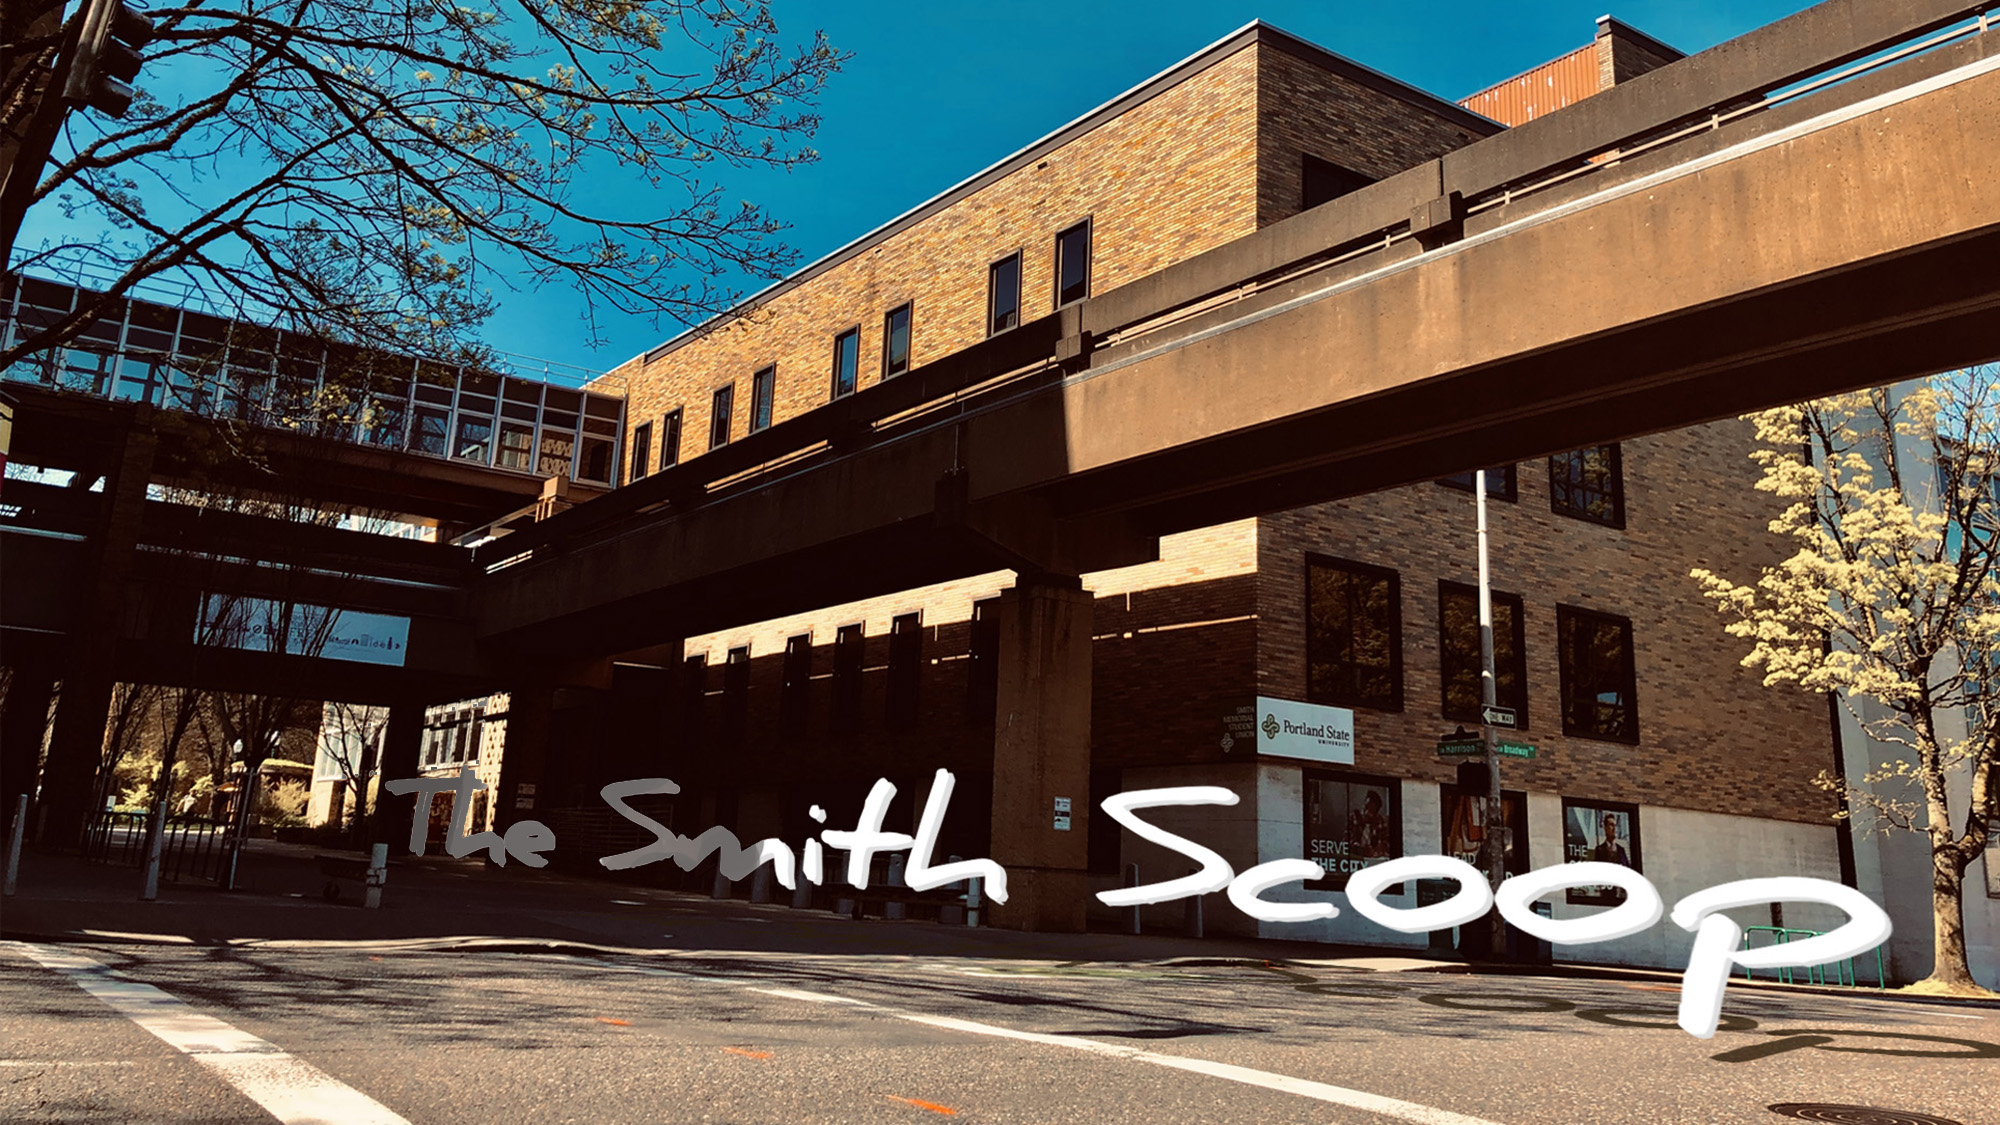 Get updates on student union life in The Smith Scoop.